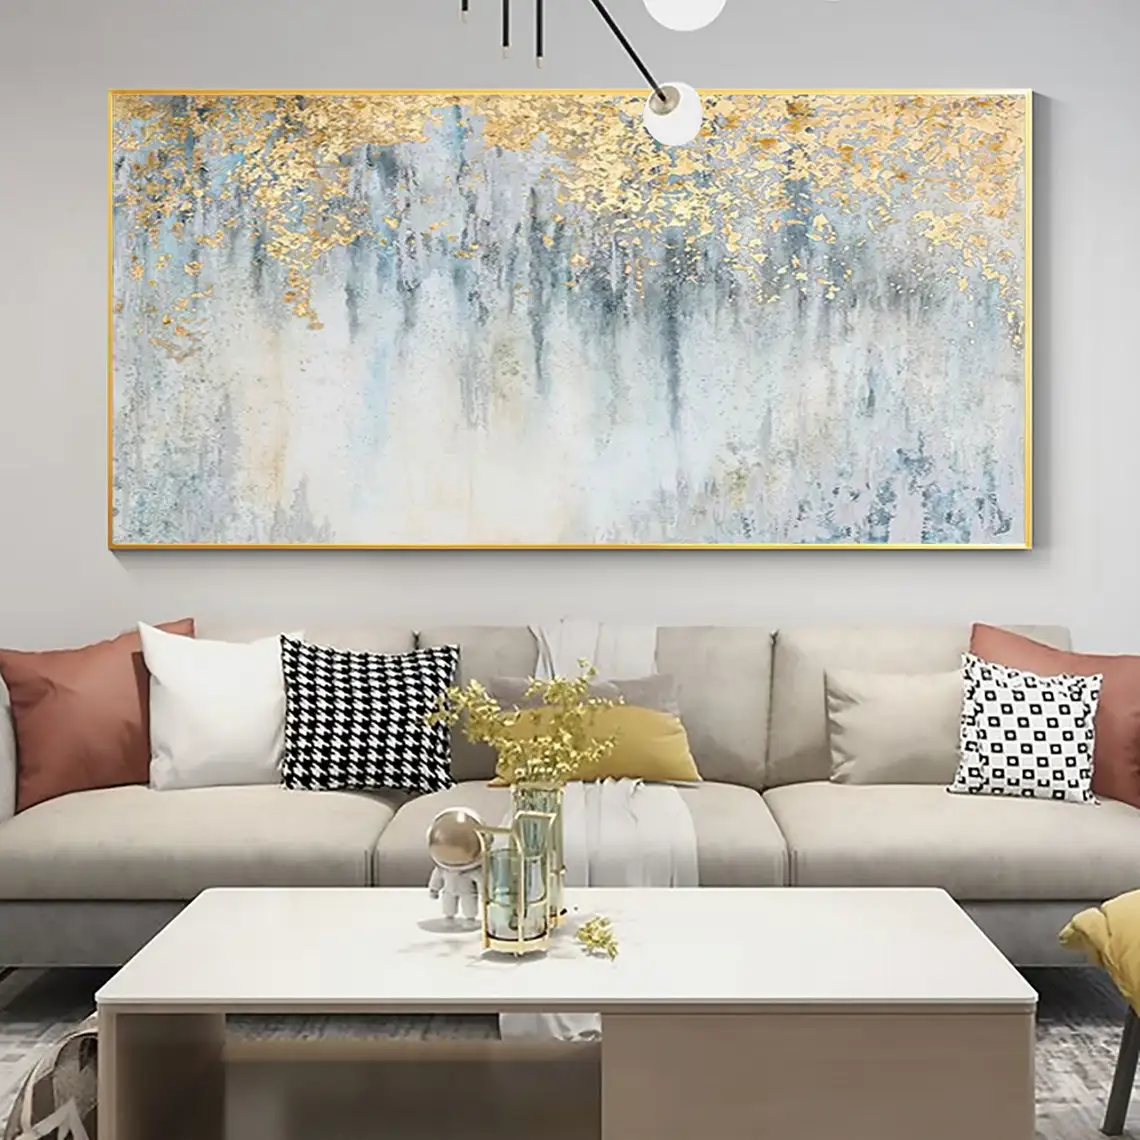 Abstract Gold Leaf Oil Painting On Canvas Modern Foil Texture Acrylic Handmade Painting Living Room Large Wall Art Home Decor